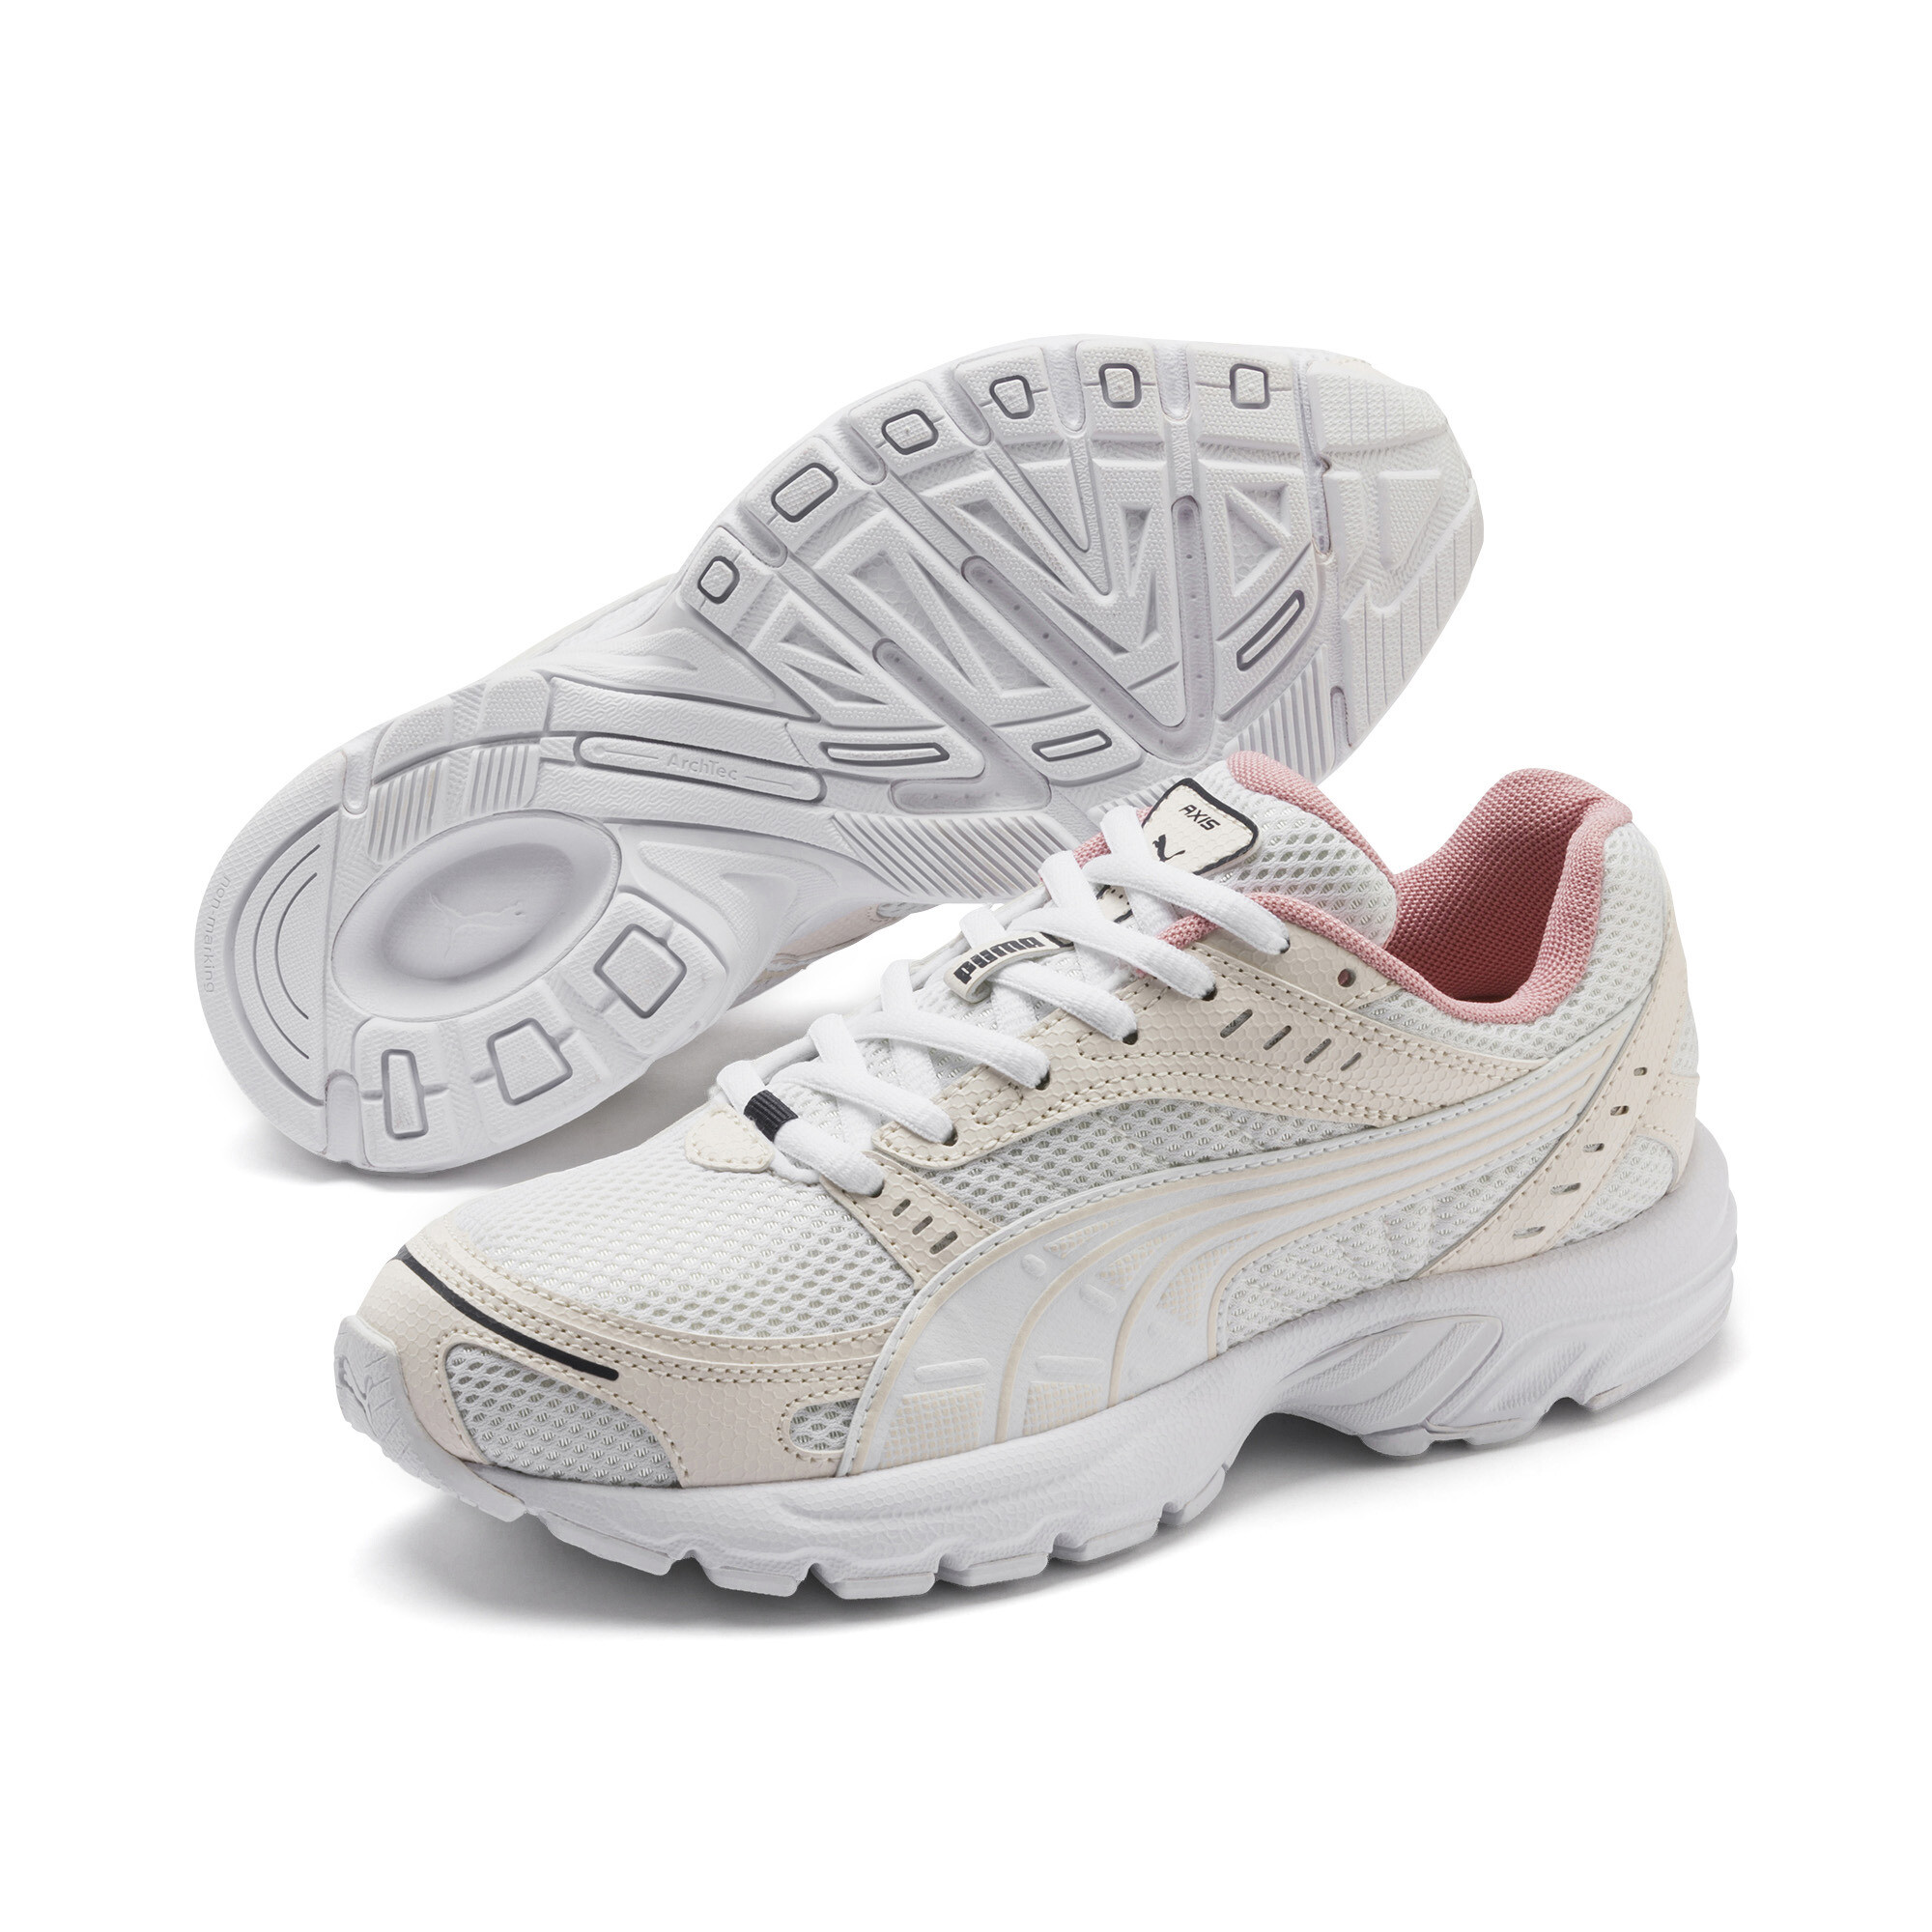 Puma Axis Trainers, White, Size 47, Shoes